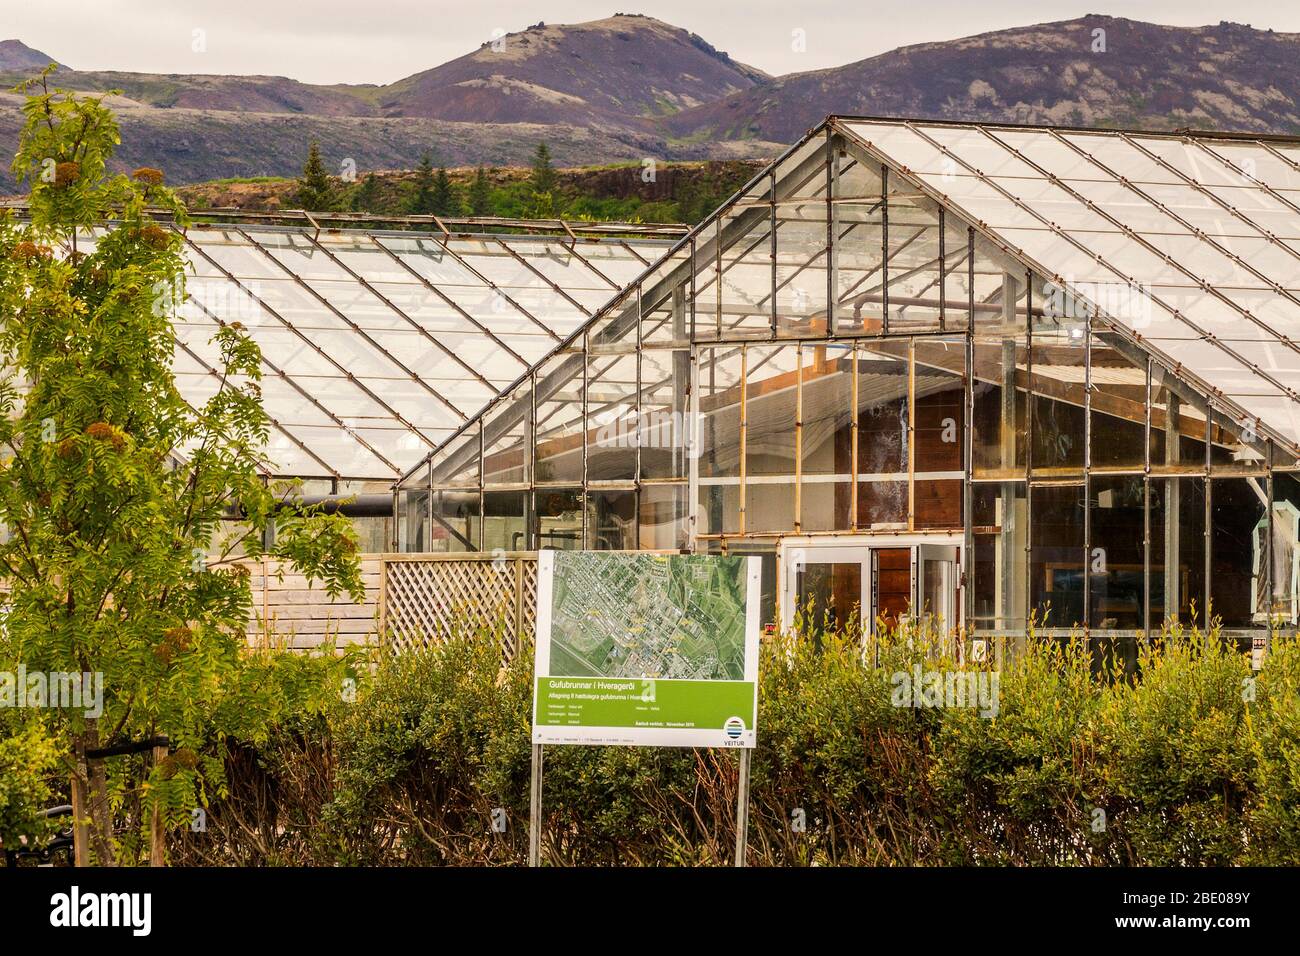 Greenhouses Heated By Geothermal Energy, Hverageroi, Iceland Stock Photo